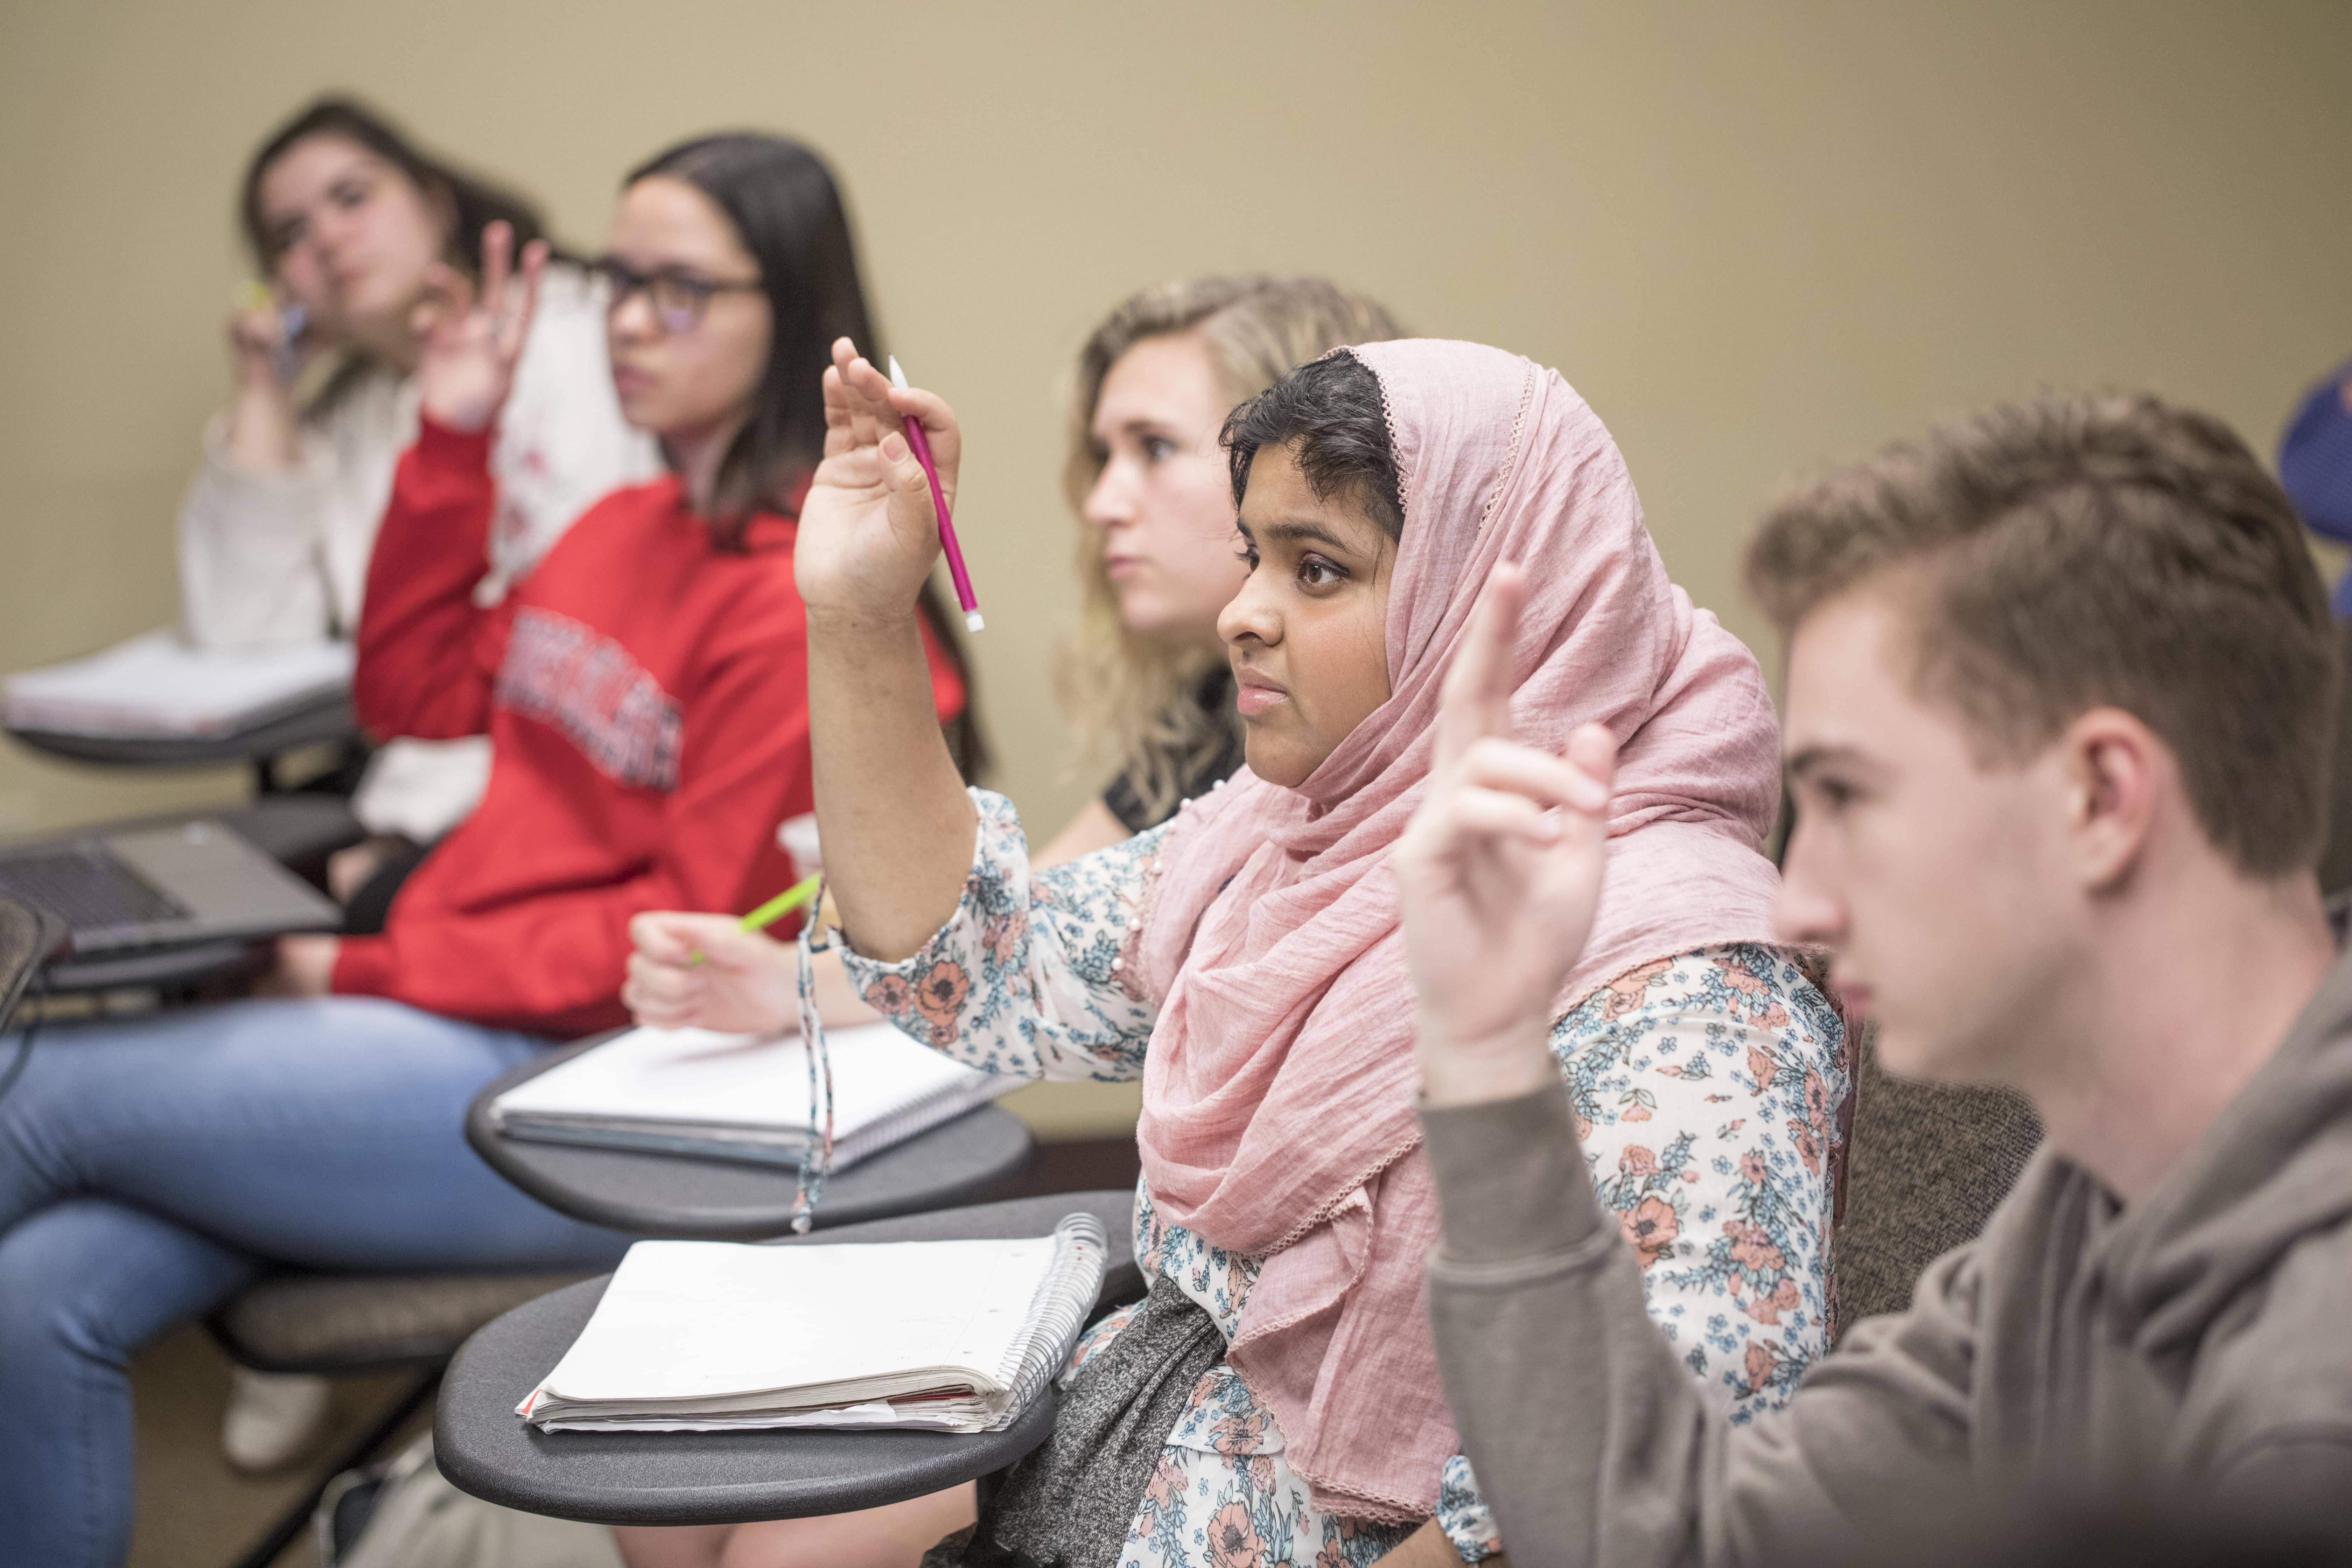 Five students are sitting at their desks, three with hands raised; the focus is on a young woman in a pink hijab